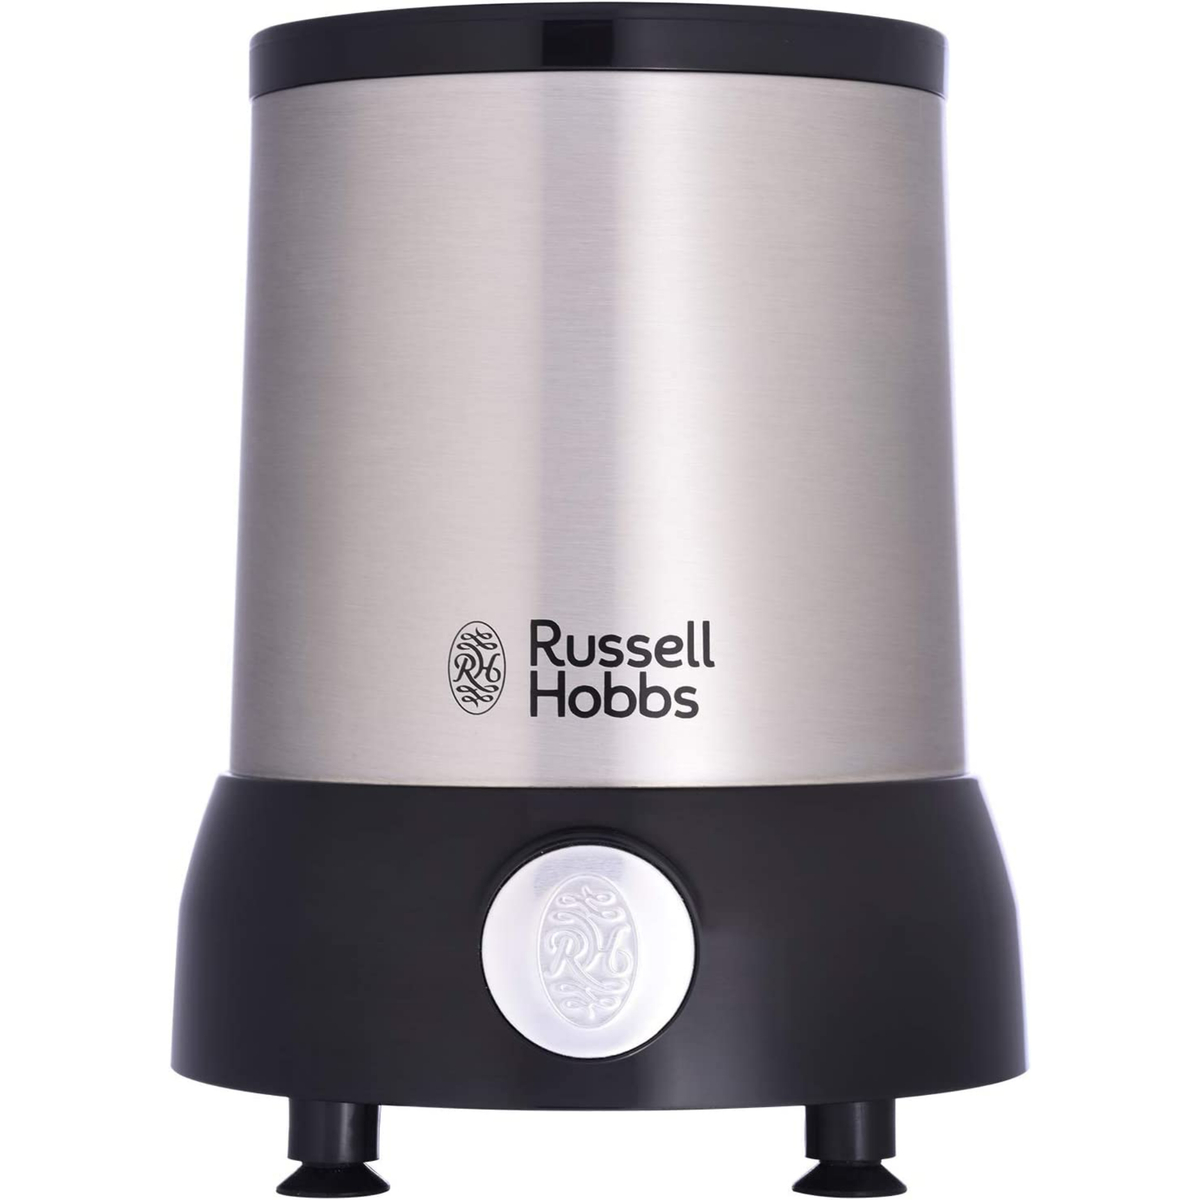 Russell Hobbs Nutri Boost Food Blender Juicer 700W, 15 Pieces Set, Multi-Function High-Speed Blender Mixer System with Nutrient Extractor, Smoothie Maker, Travel & Shaker Lids, Dishwasher Safe 23180